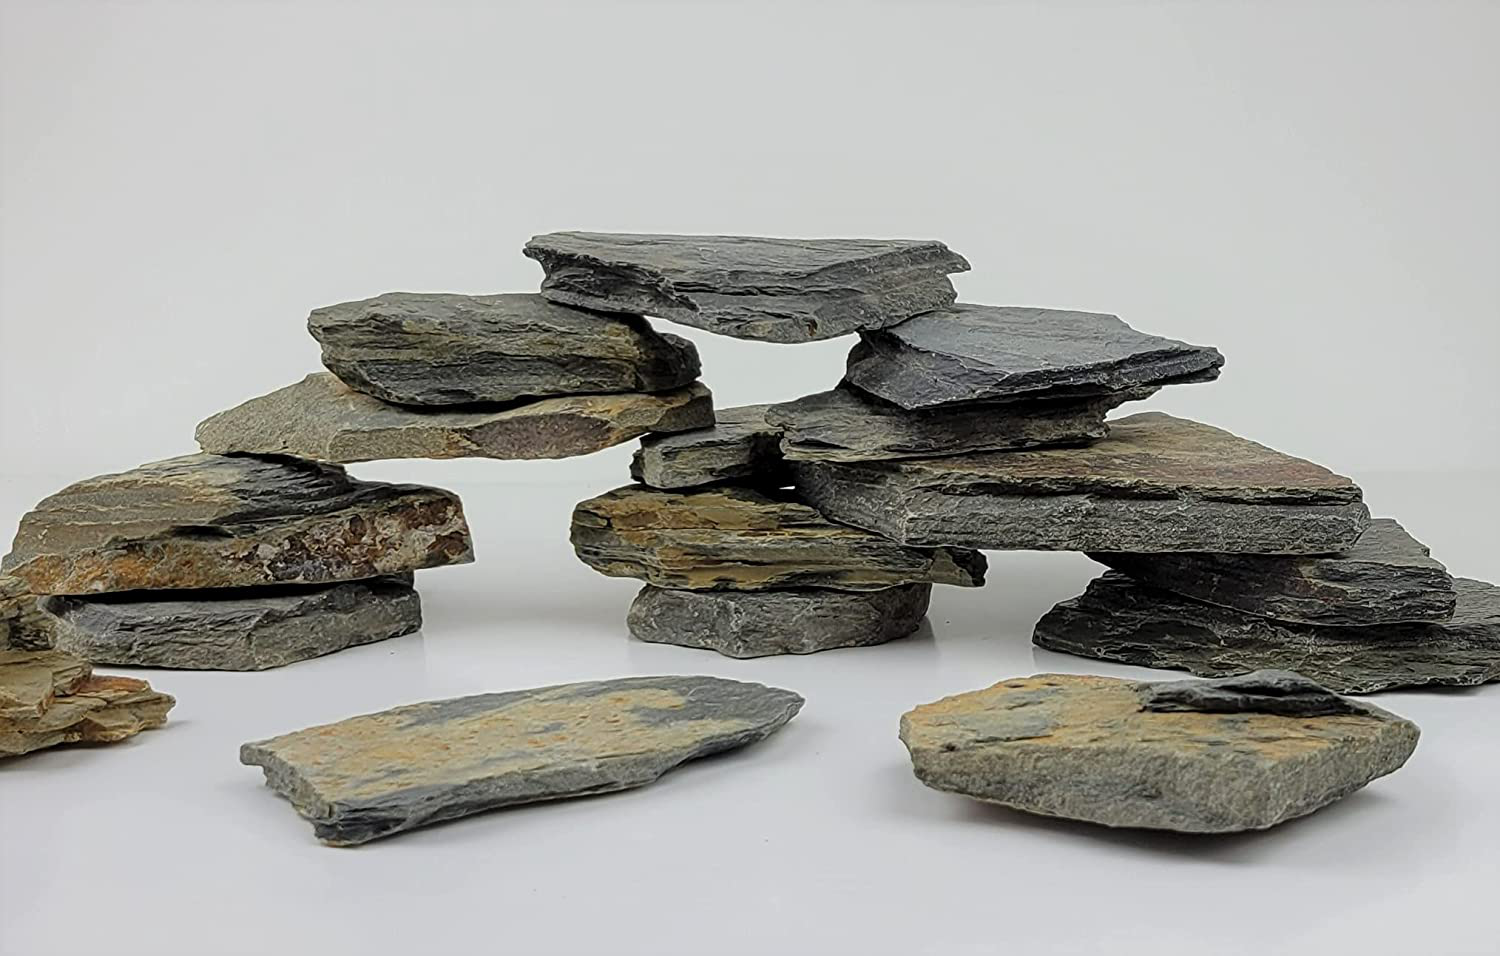 Natural Slate Stone Aquarium Decorations - Slate Rock for Reptile Terrarium Decor | 3 to 5 Inch, 5 to 7 Inch or 8 to 10 Inch